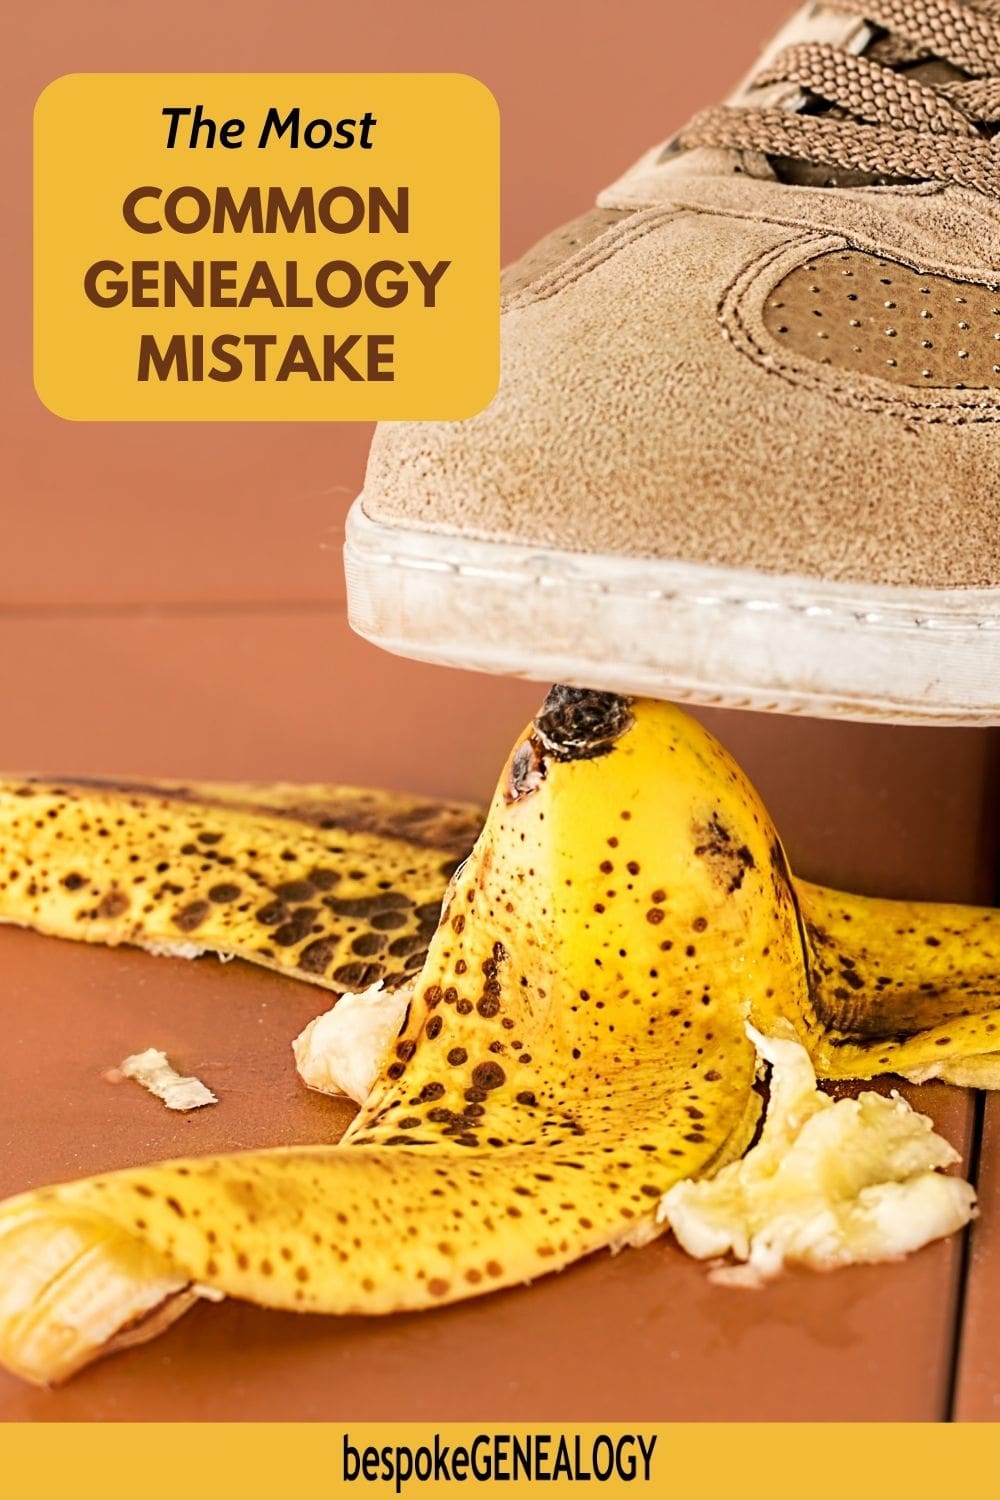 The most common genealogy mistake. Photo of someone's foot in a trainer just about to step on a banana skin.